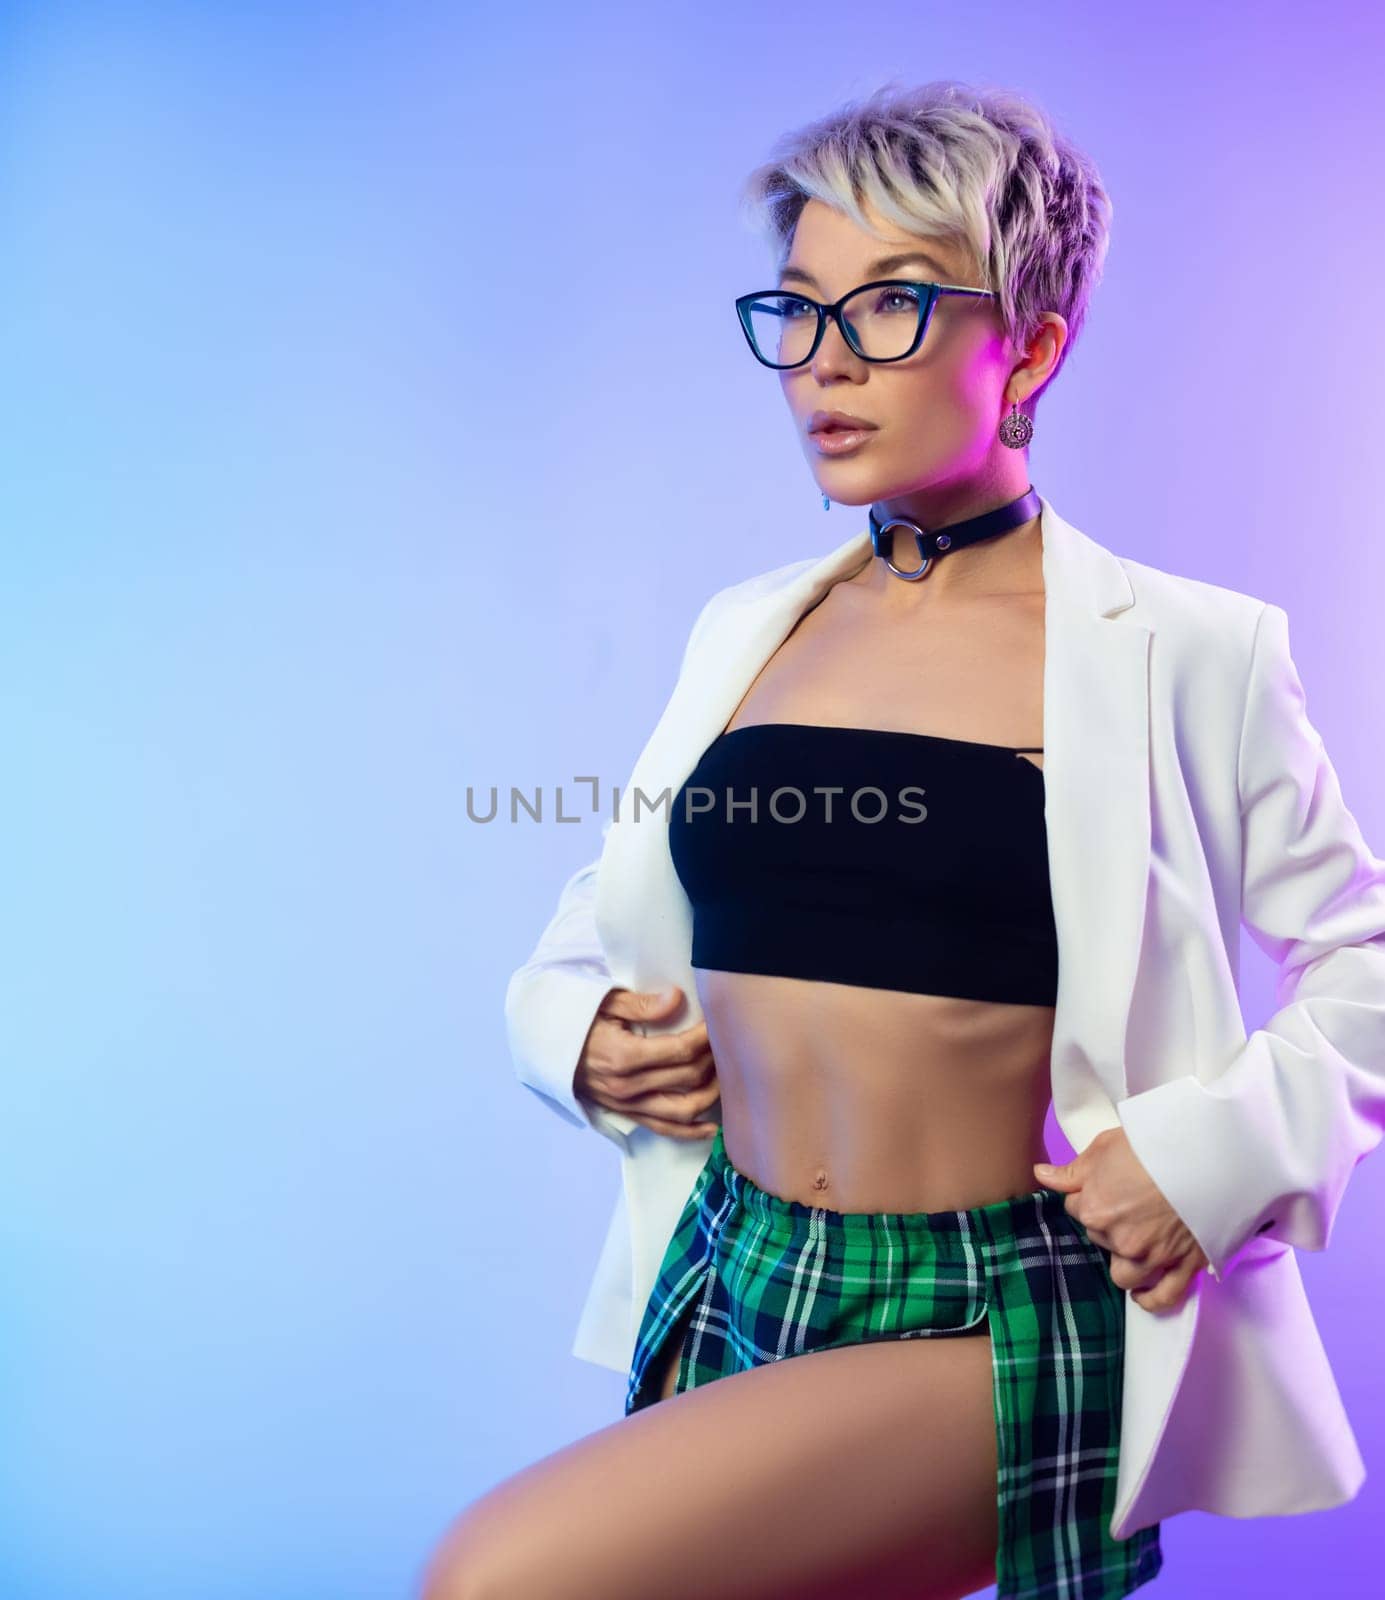 Sexy girl with glasses and a white jacket with a plaid skirt in neon light on a background of copy paste by Rotozey